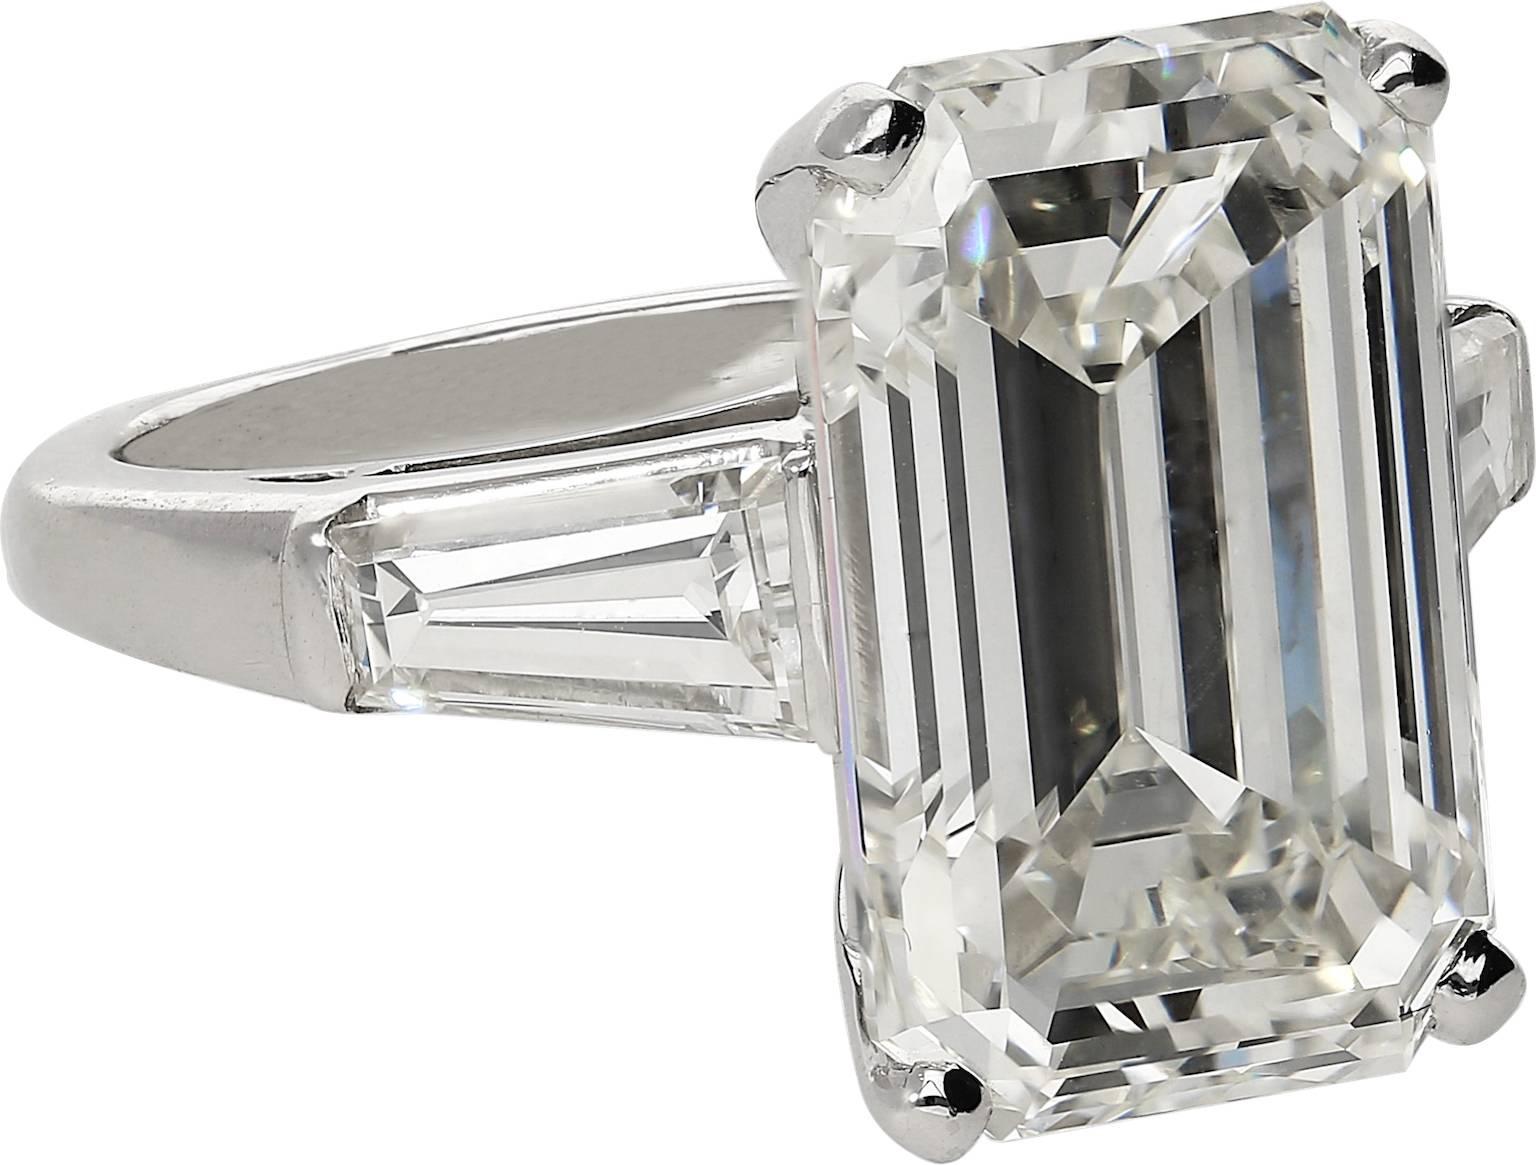  GIA Certified Natural 10.03 Carat Emerald Cut elongated engagement ring. Set in Platinum and shouldered by two Tapered Baguette Cut Diamonds, the diamond ring is. GIA certified as 